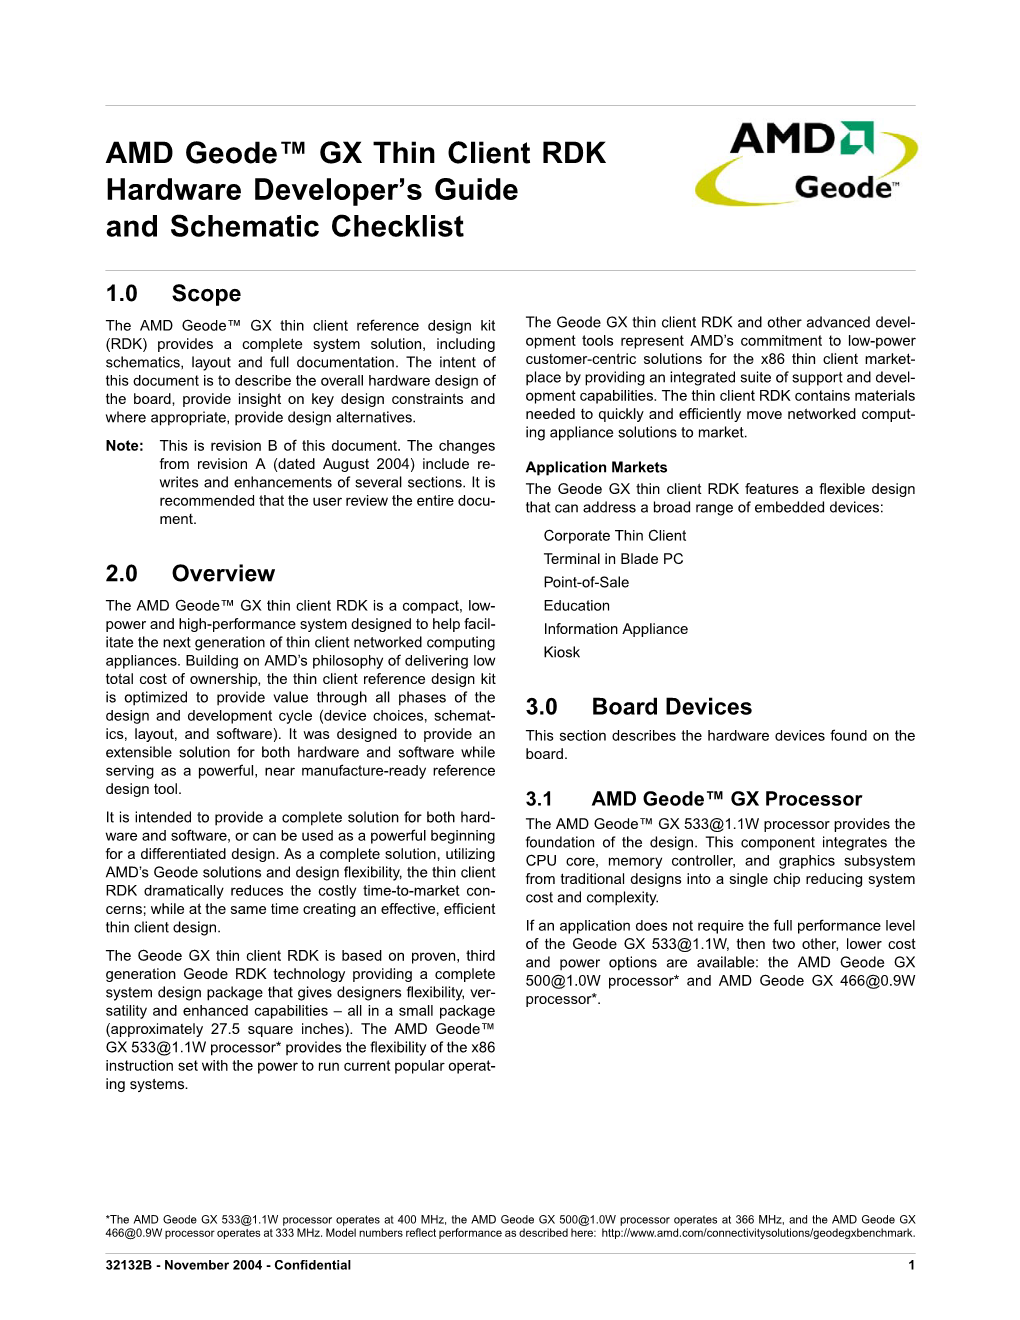 AMD Geode GX Thin Client RDK Hardware Developer's Guide And